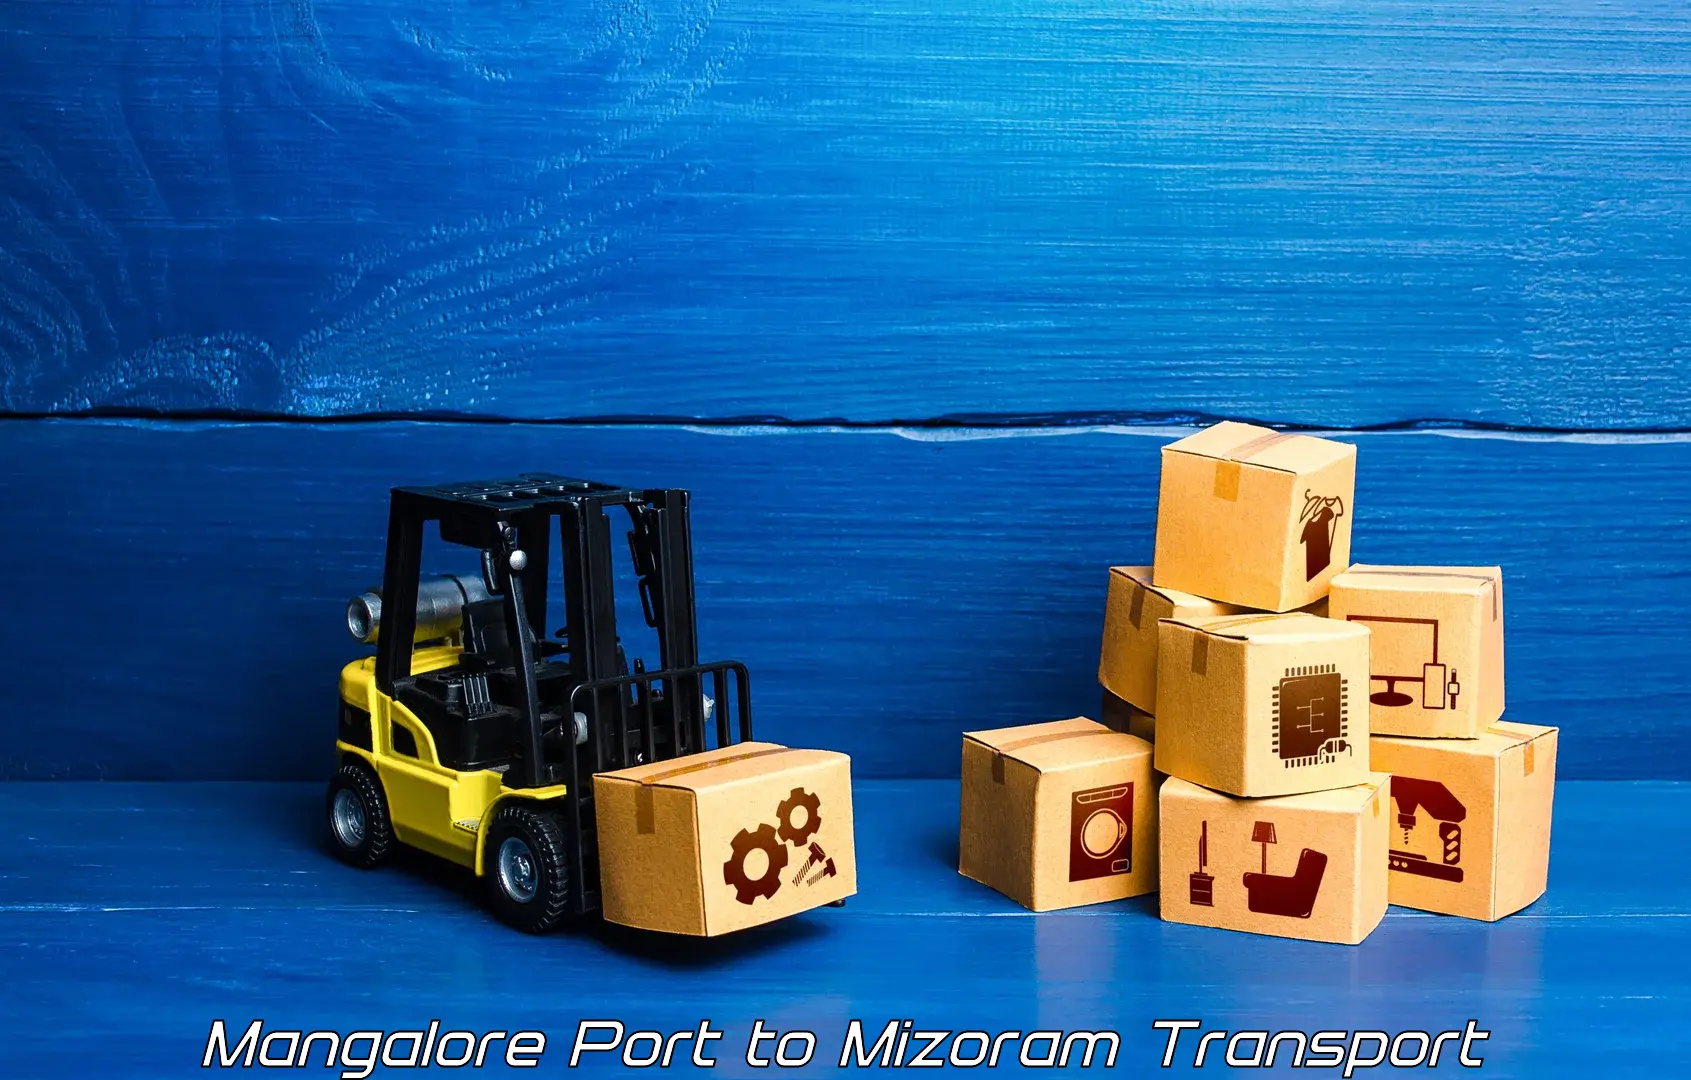 Part load transport service in India Mangalore Port to Darlawn